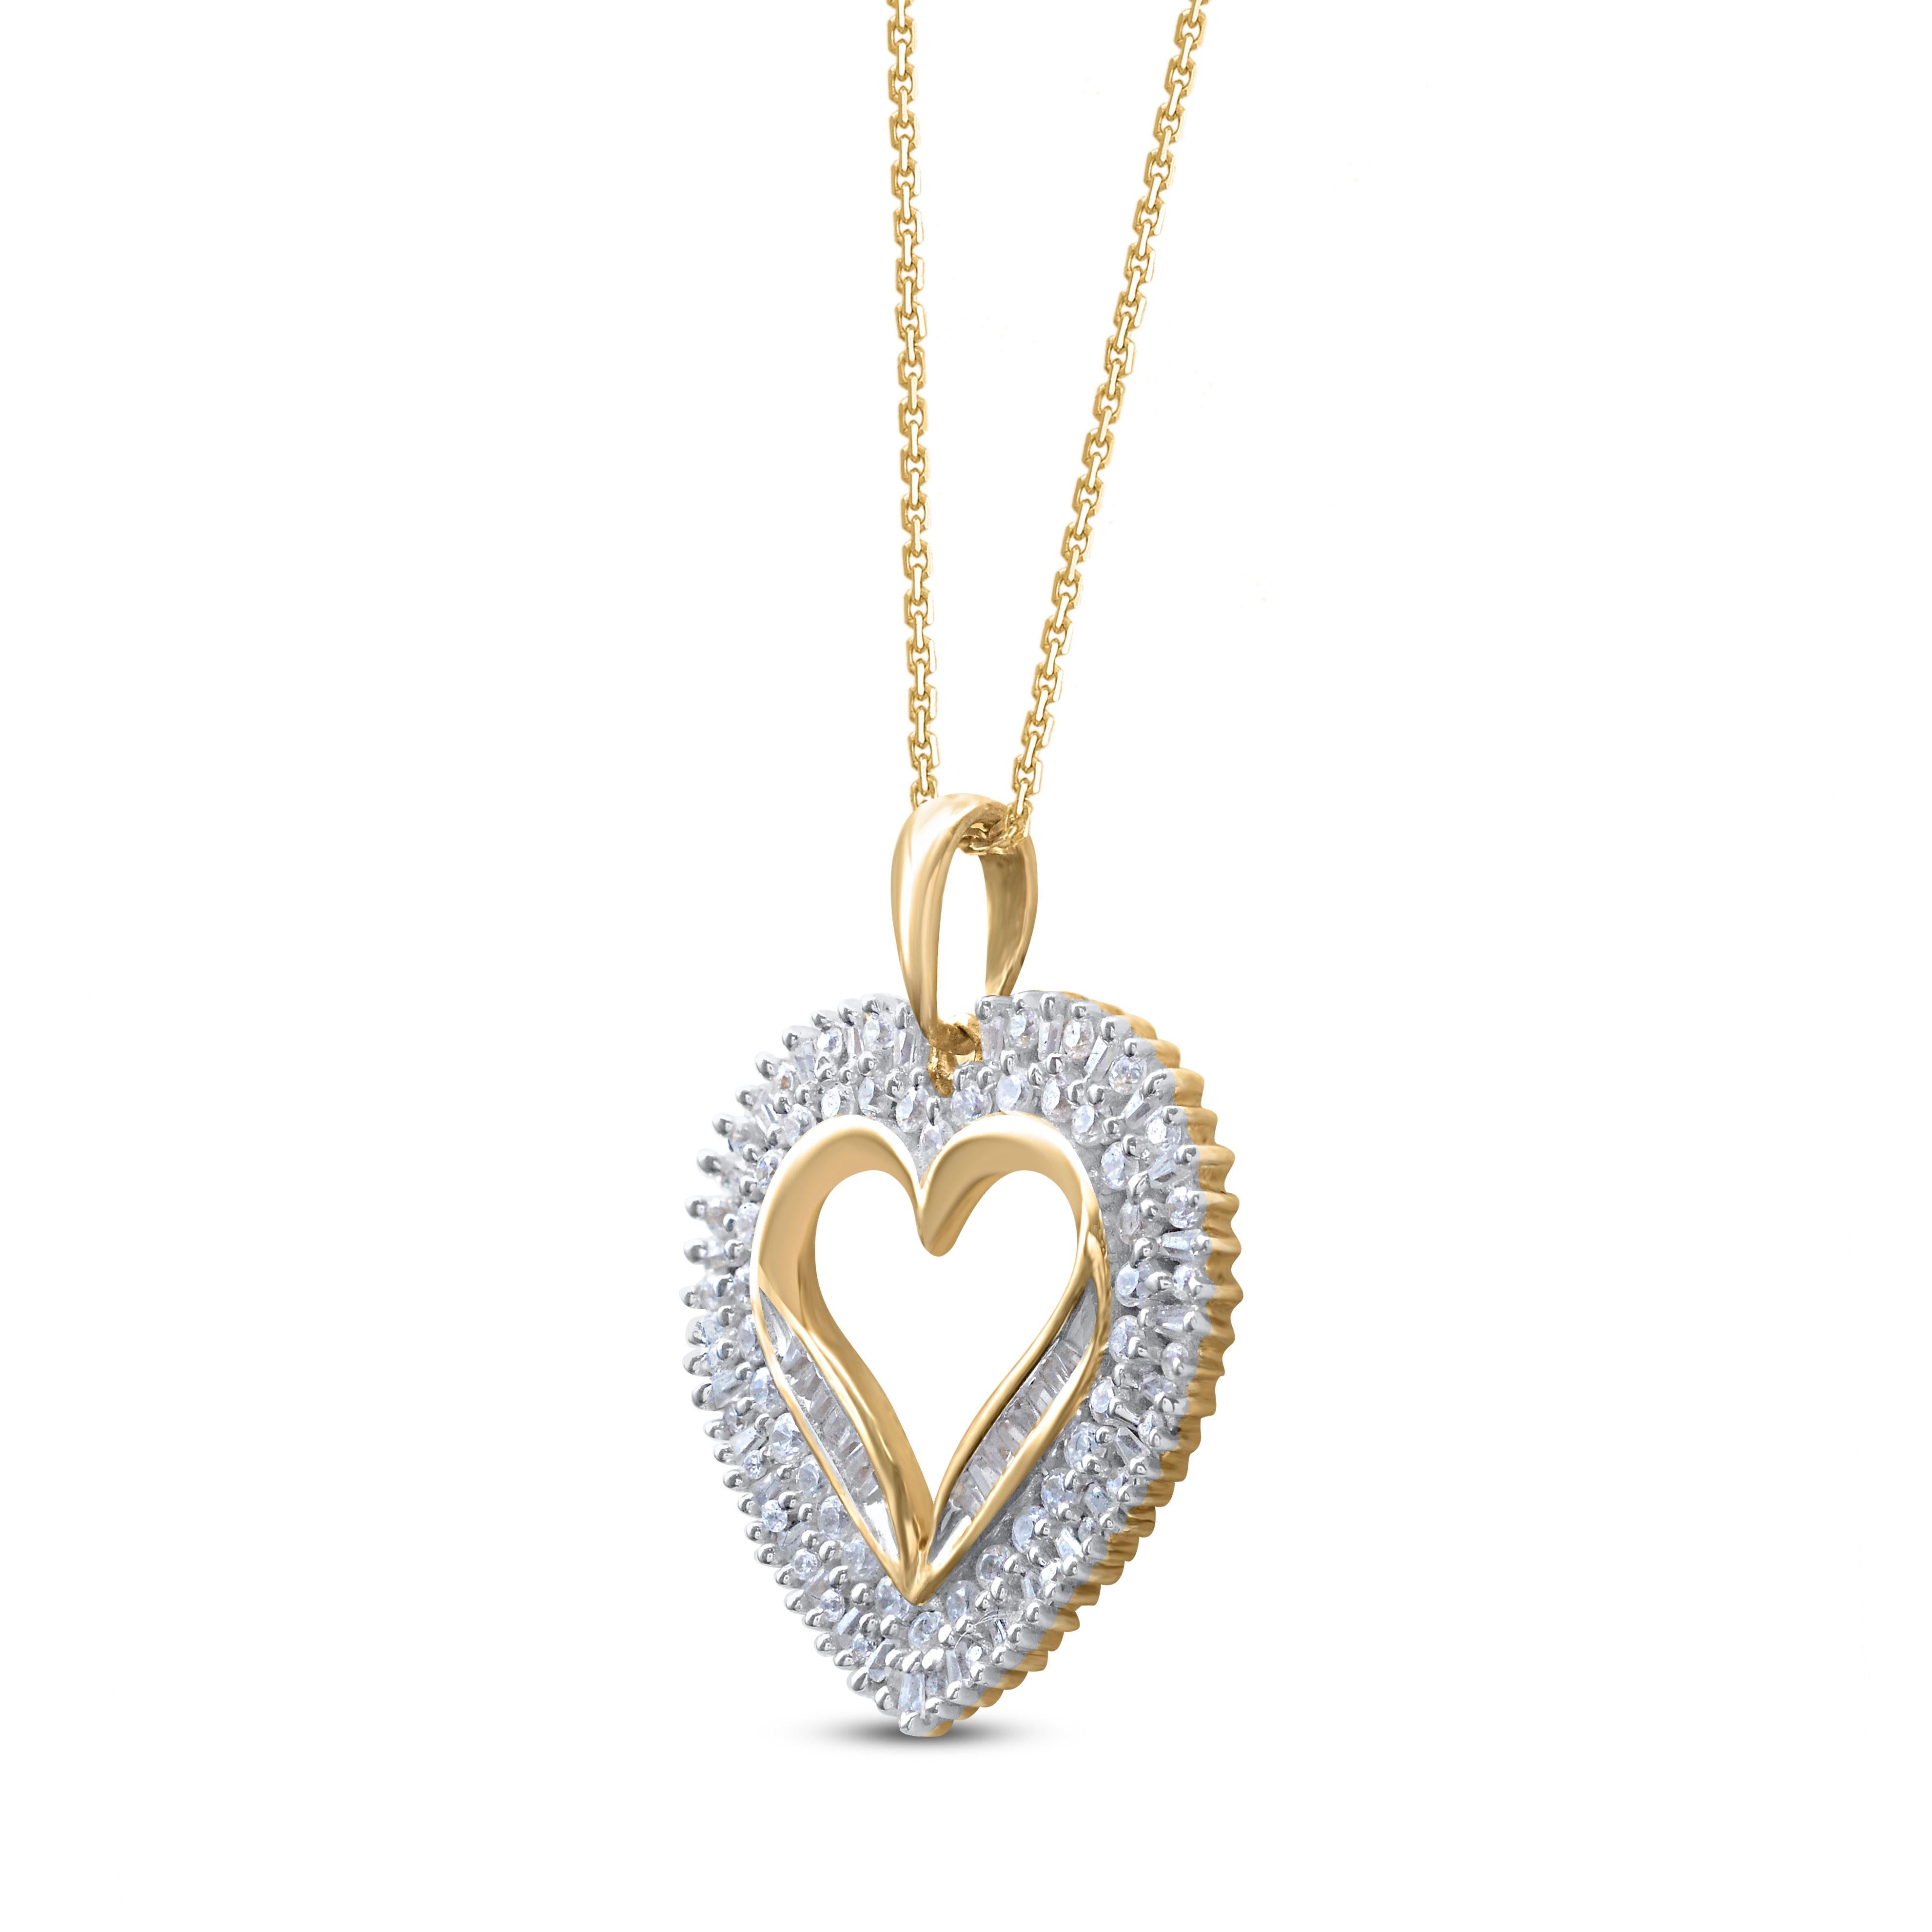 Bring charm to your look with this diamond heart pendant. The pendant is crafted from 14 karat yellow gold and features 103 round brilliant cut and baguette cut diamond set in half channel, prong & channel setting and a high polish finish complete